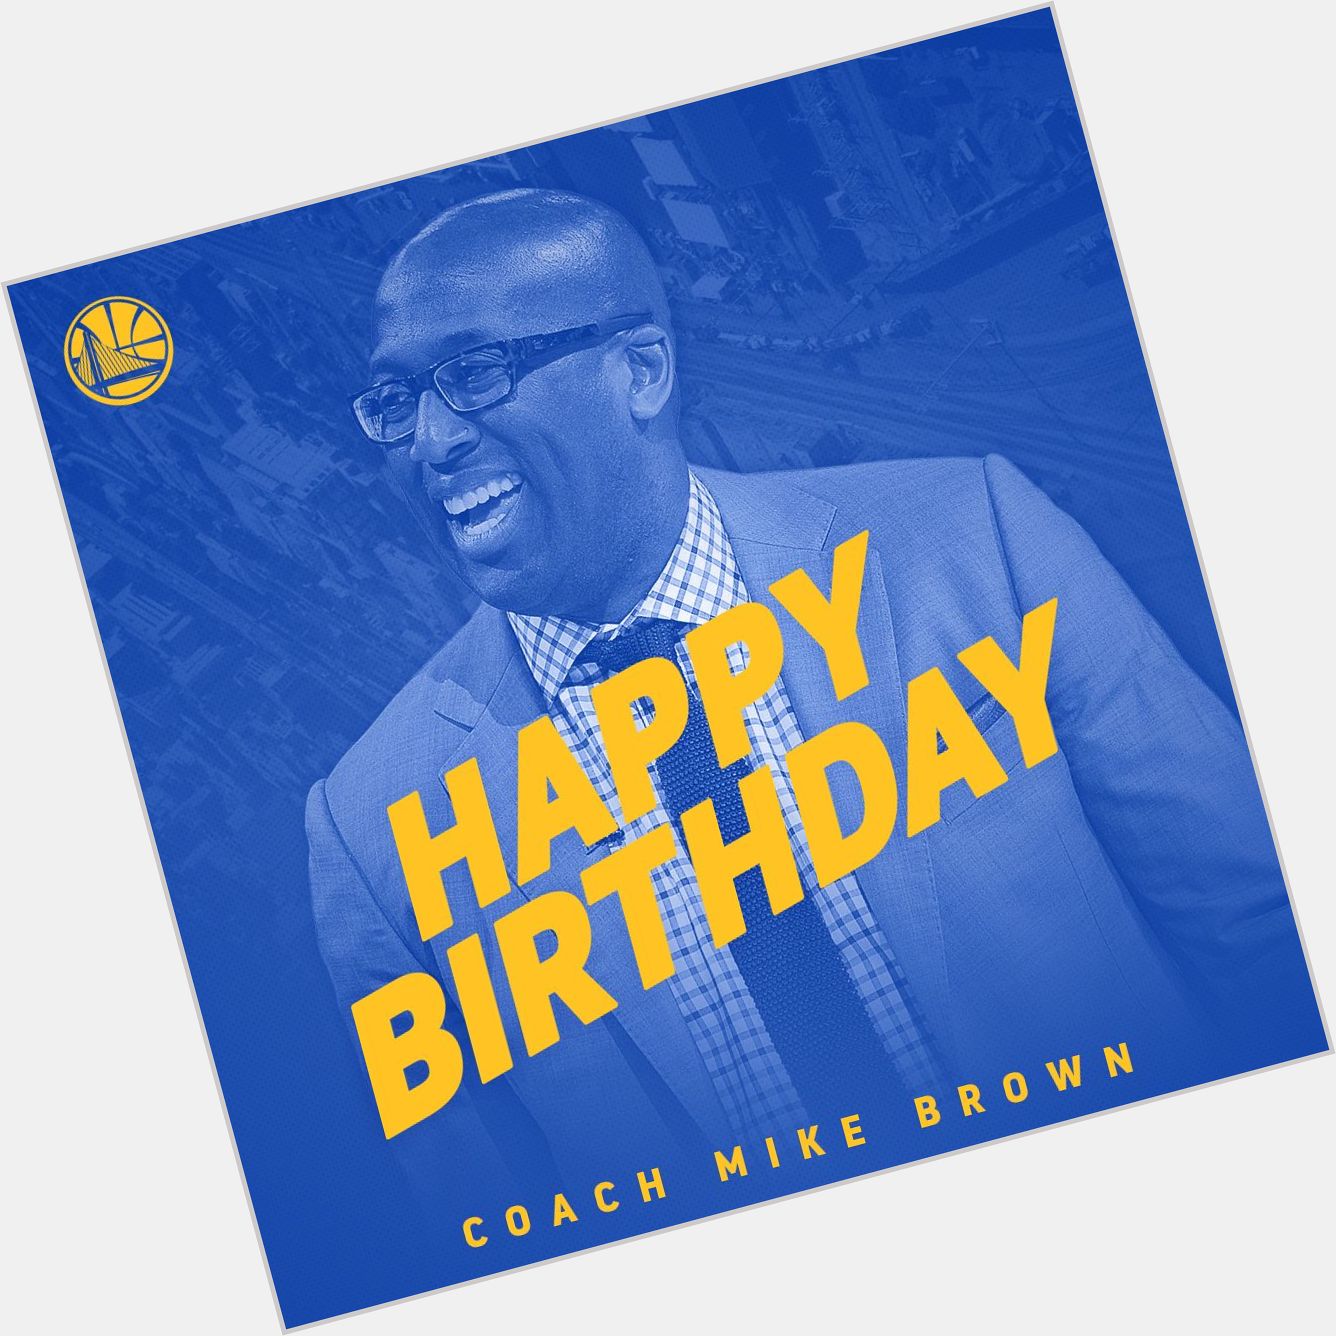 Wishing a very Happy Birthday to Dubs Assistant Coach Mike Brown! 